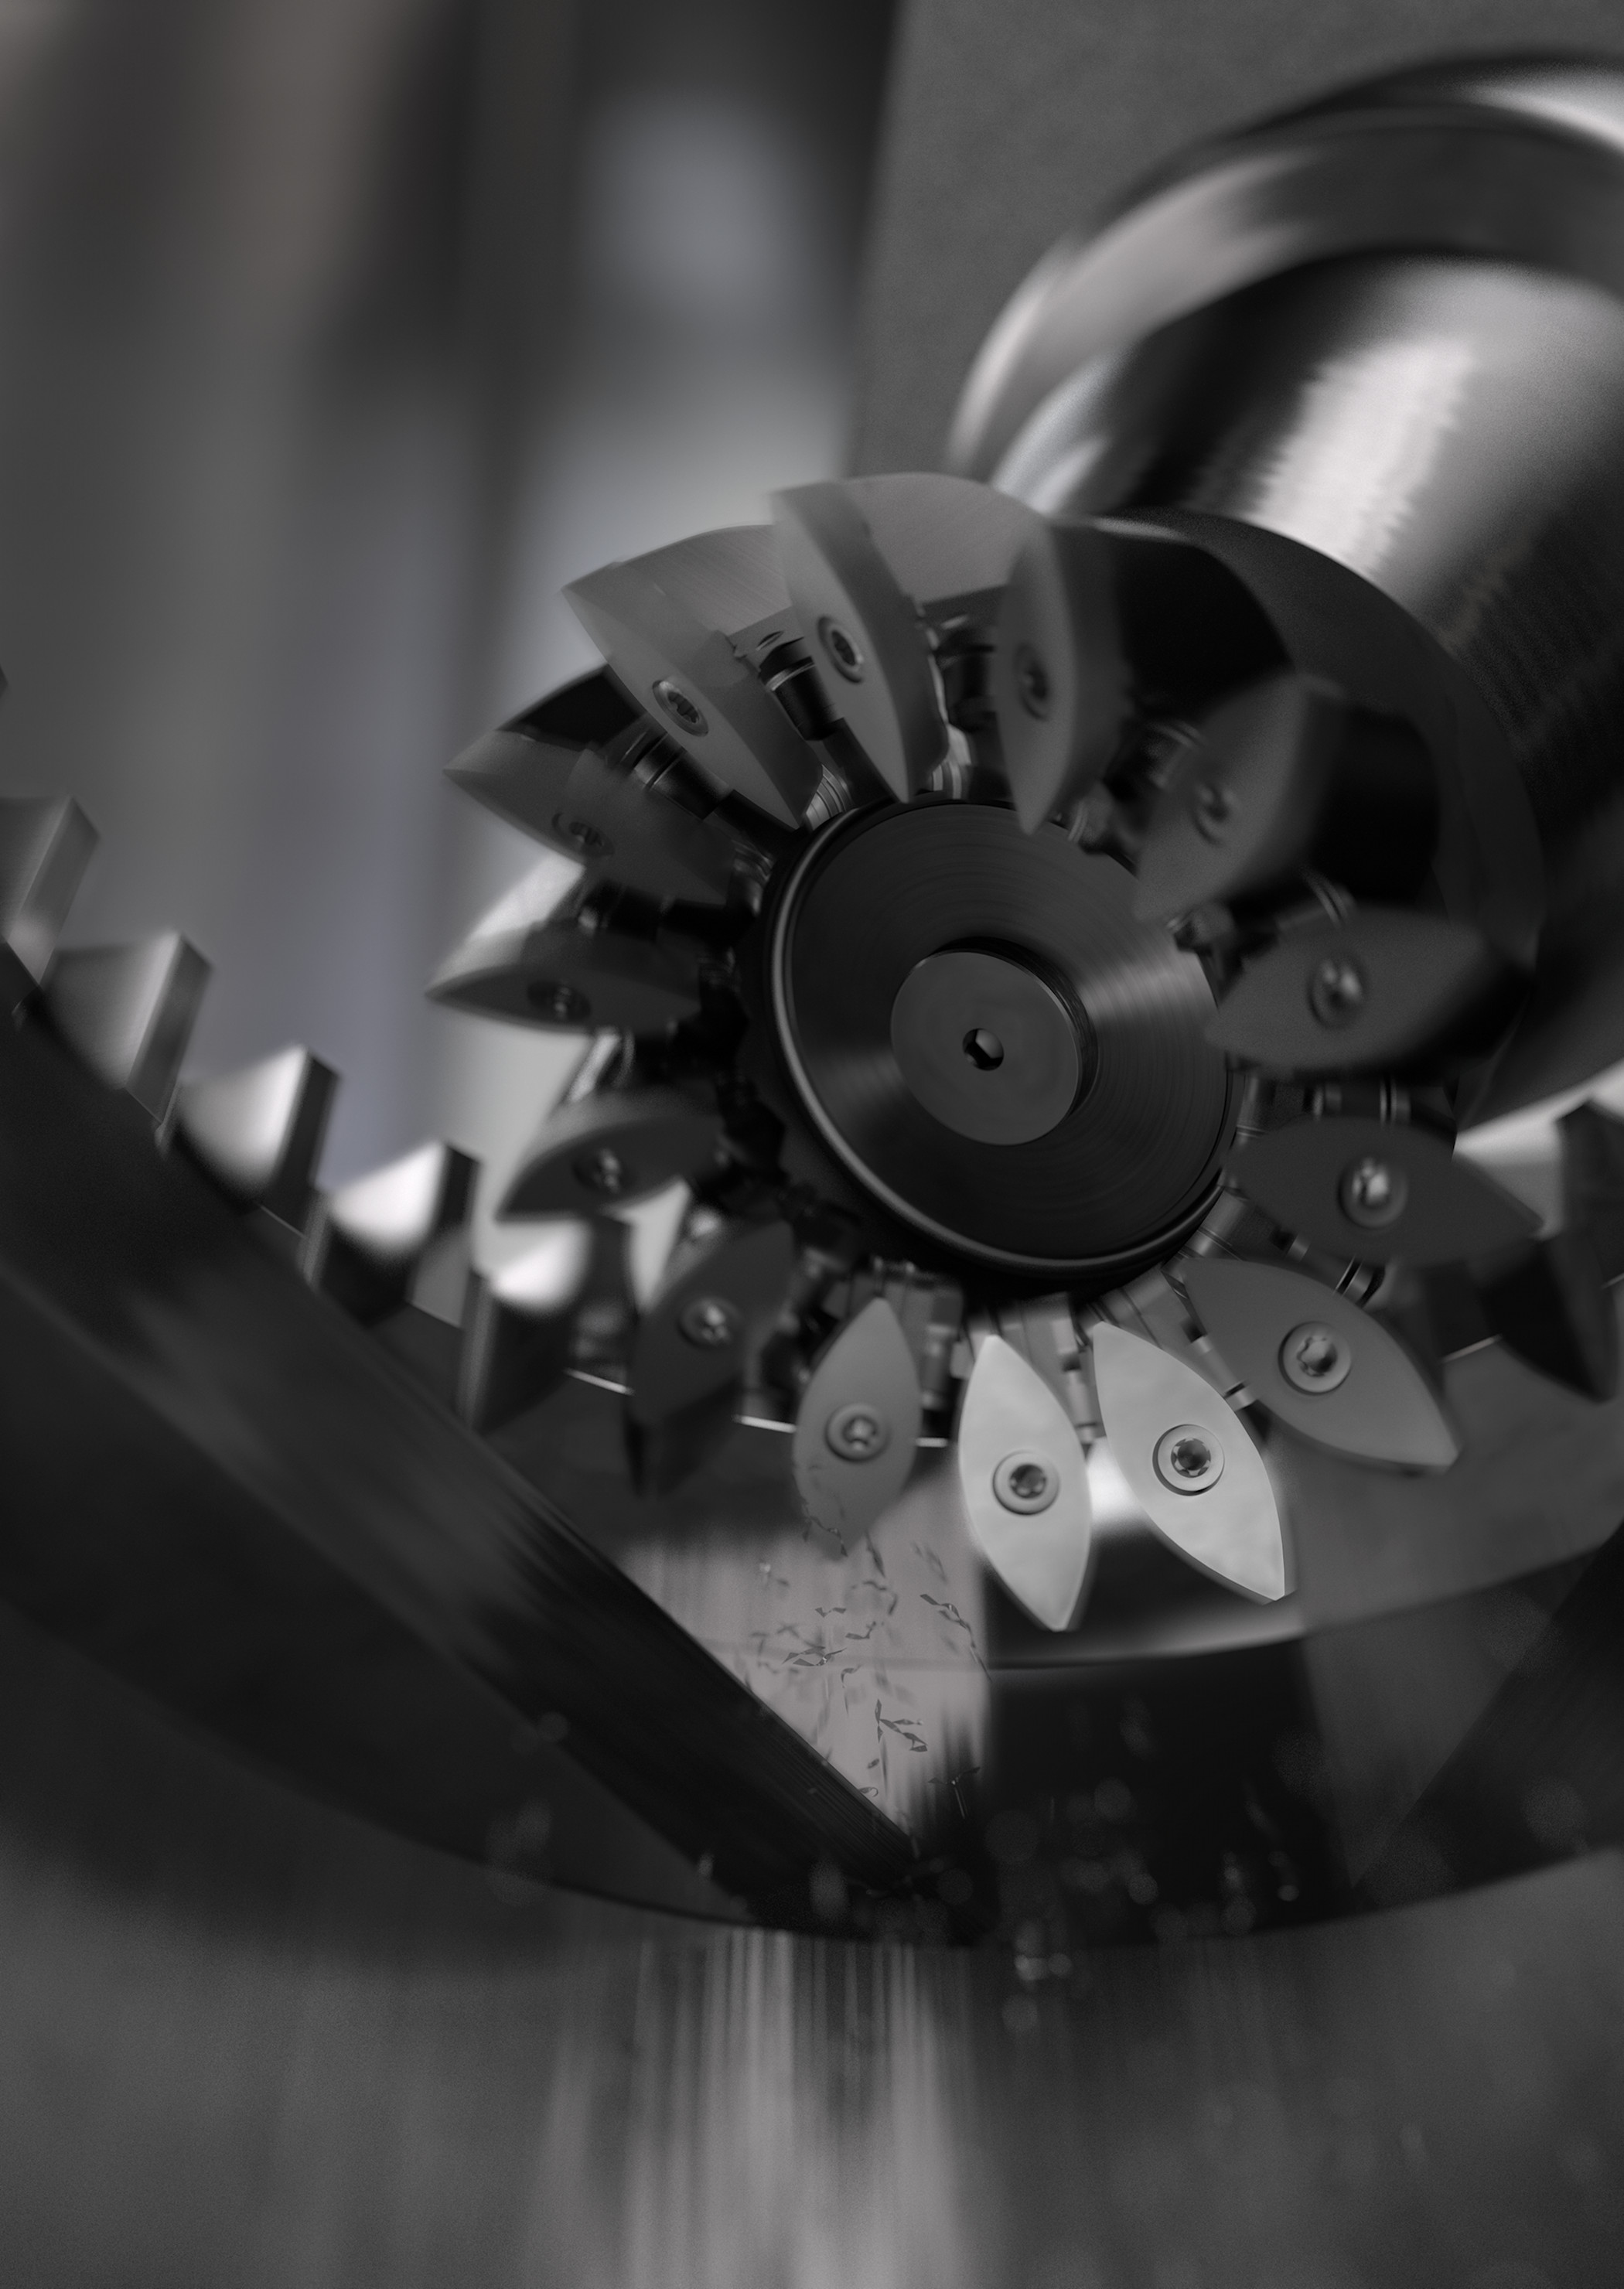 New ways of machining – 2: Power skiving, with tools like CoroMill® 180 indexable power skiving cutter, enables all machining to be carried out in one single set-up.